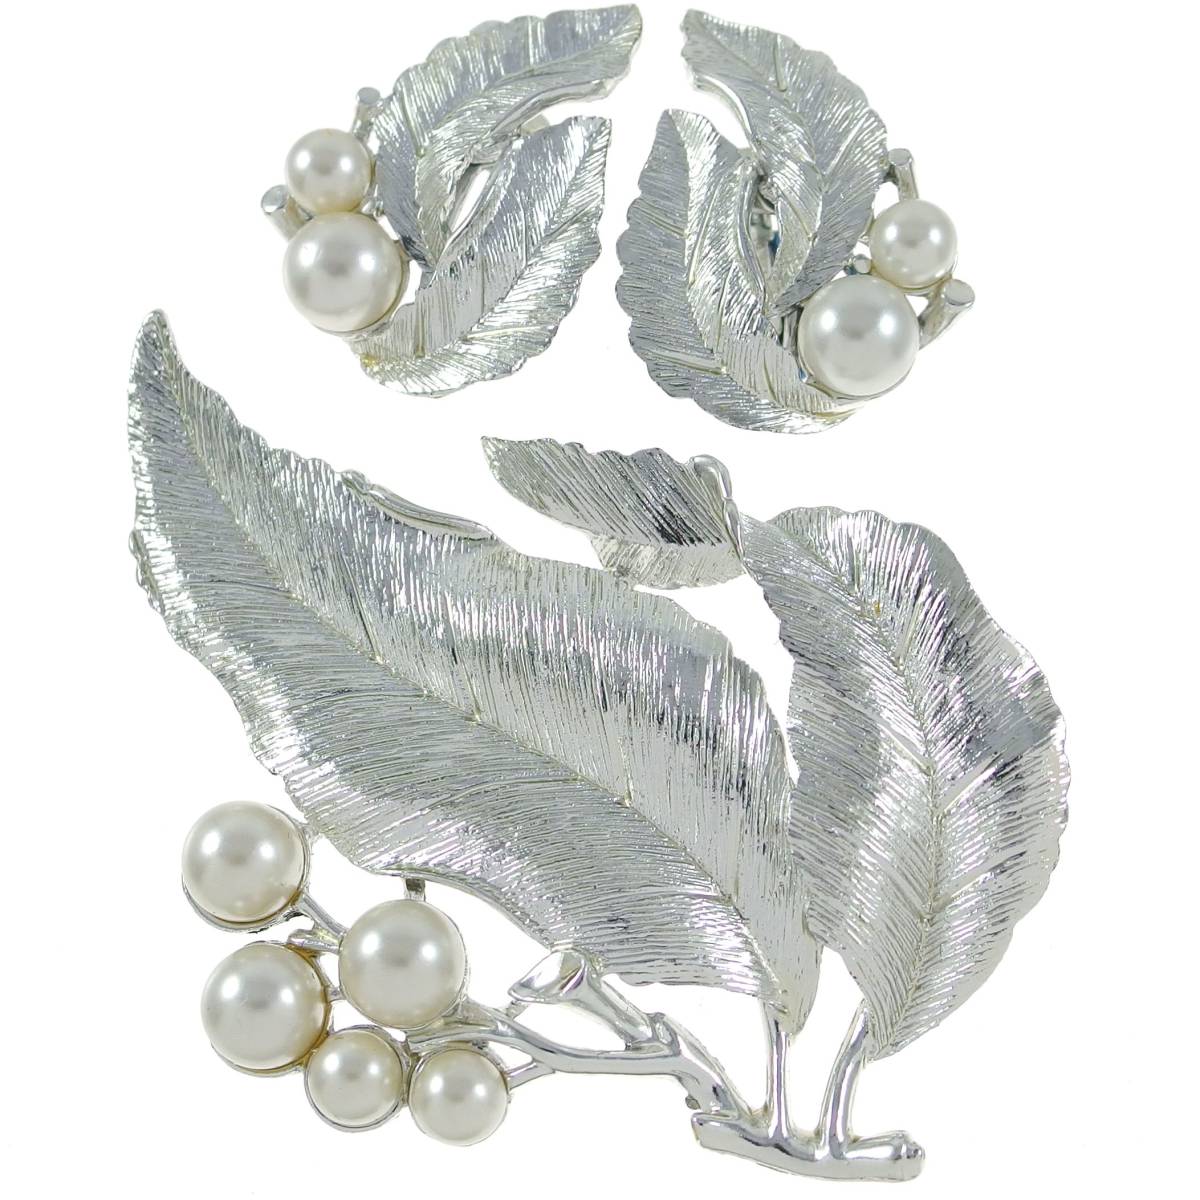 A4786*[SARAH COVENTRY] * beautiful goods * Vintage brooch * fake pearl . ornament ...2 sheets. leaf ..* leaf motif *